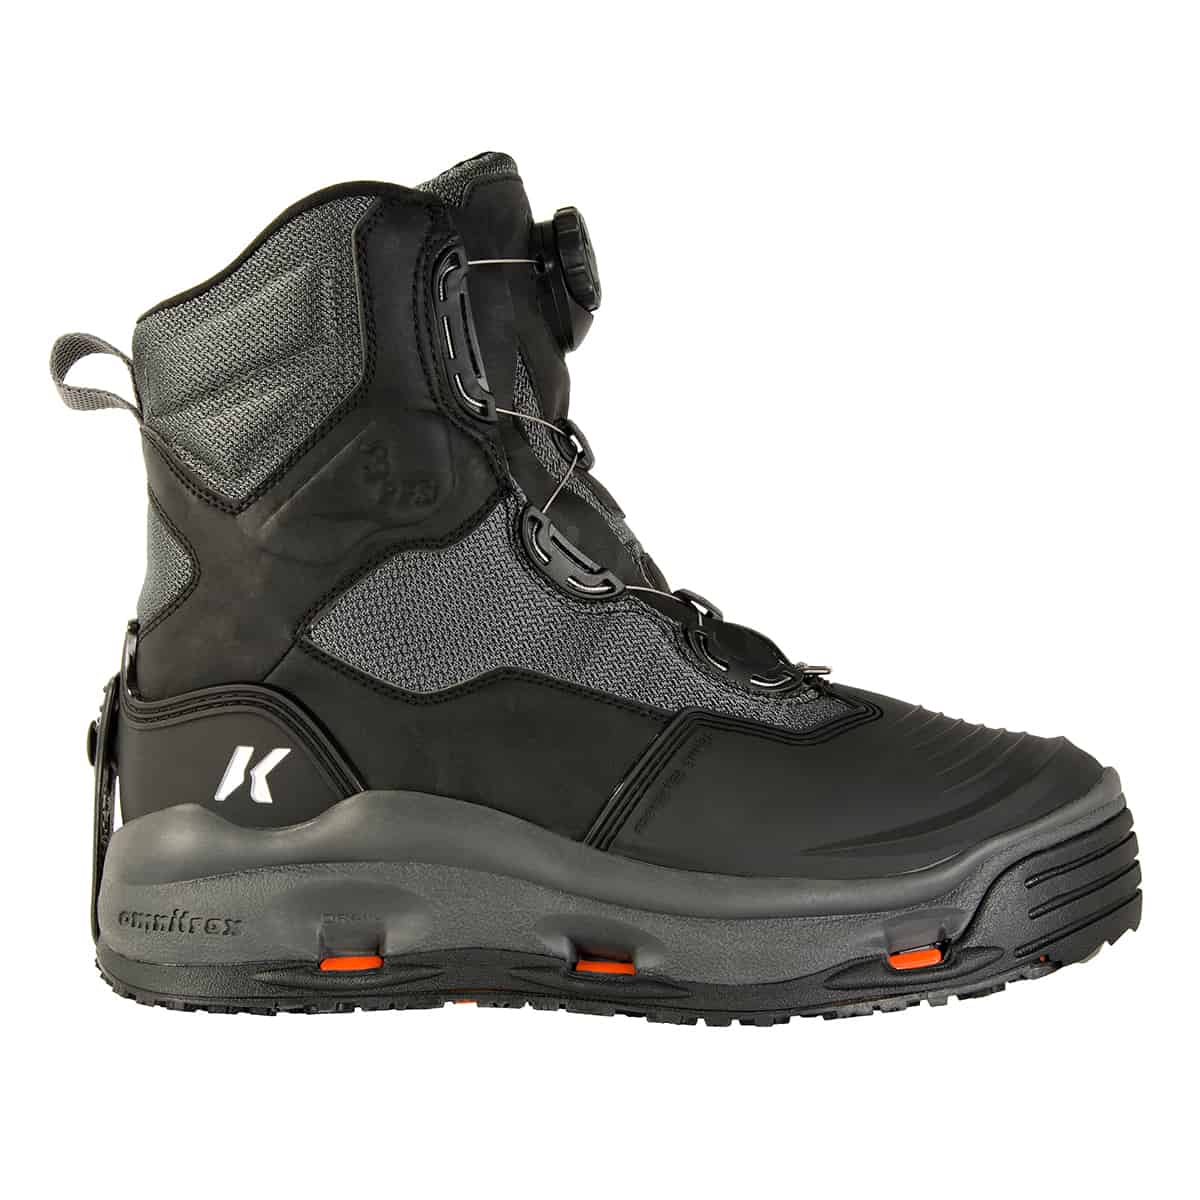 korkers darkhorse wading boot lateral fishing wading boot with boa lacing